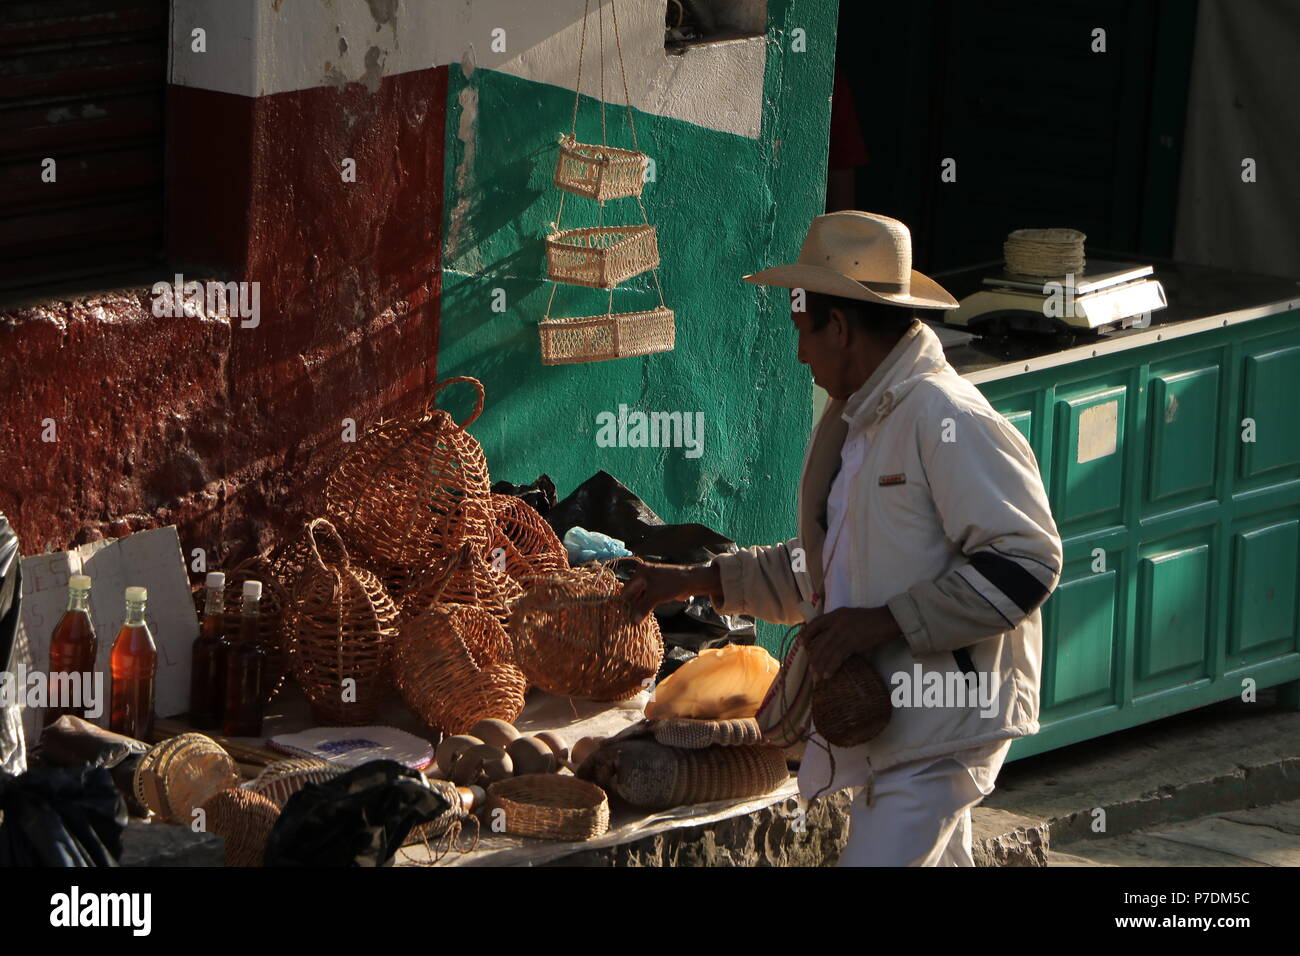 Man in Mexican market Stock Photo